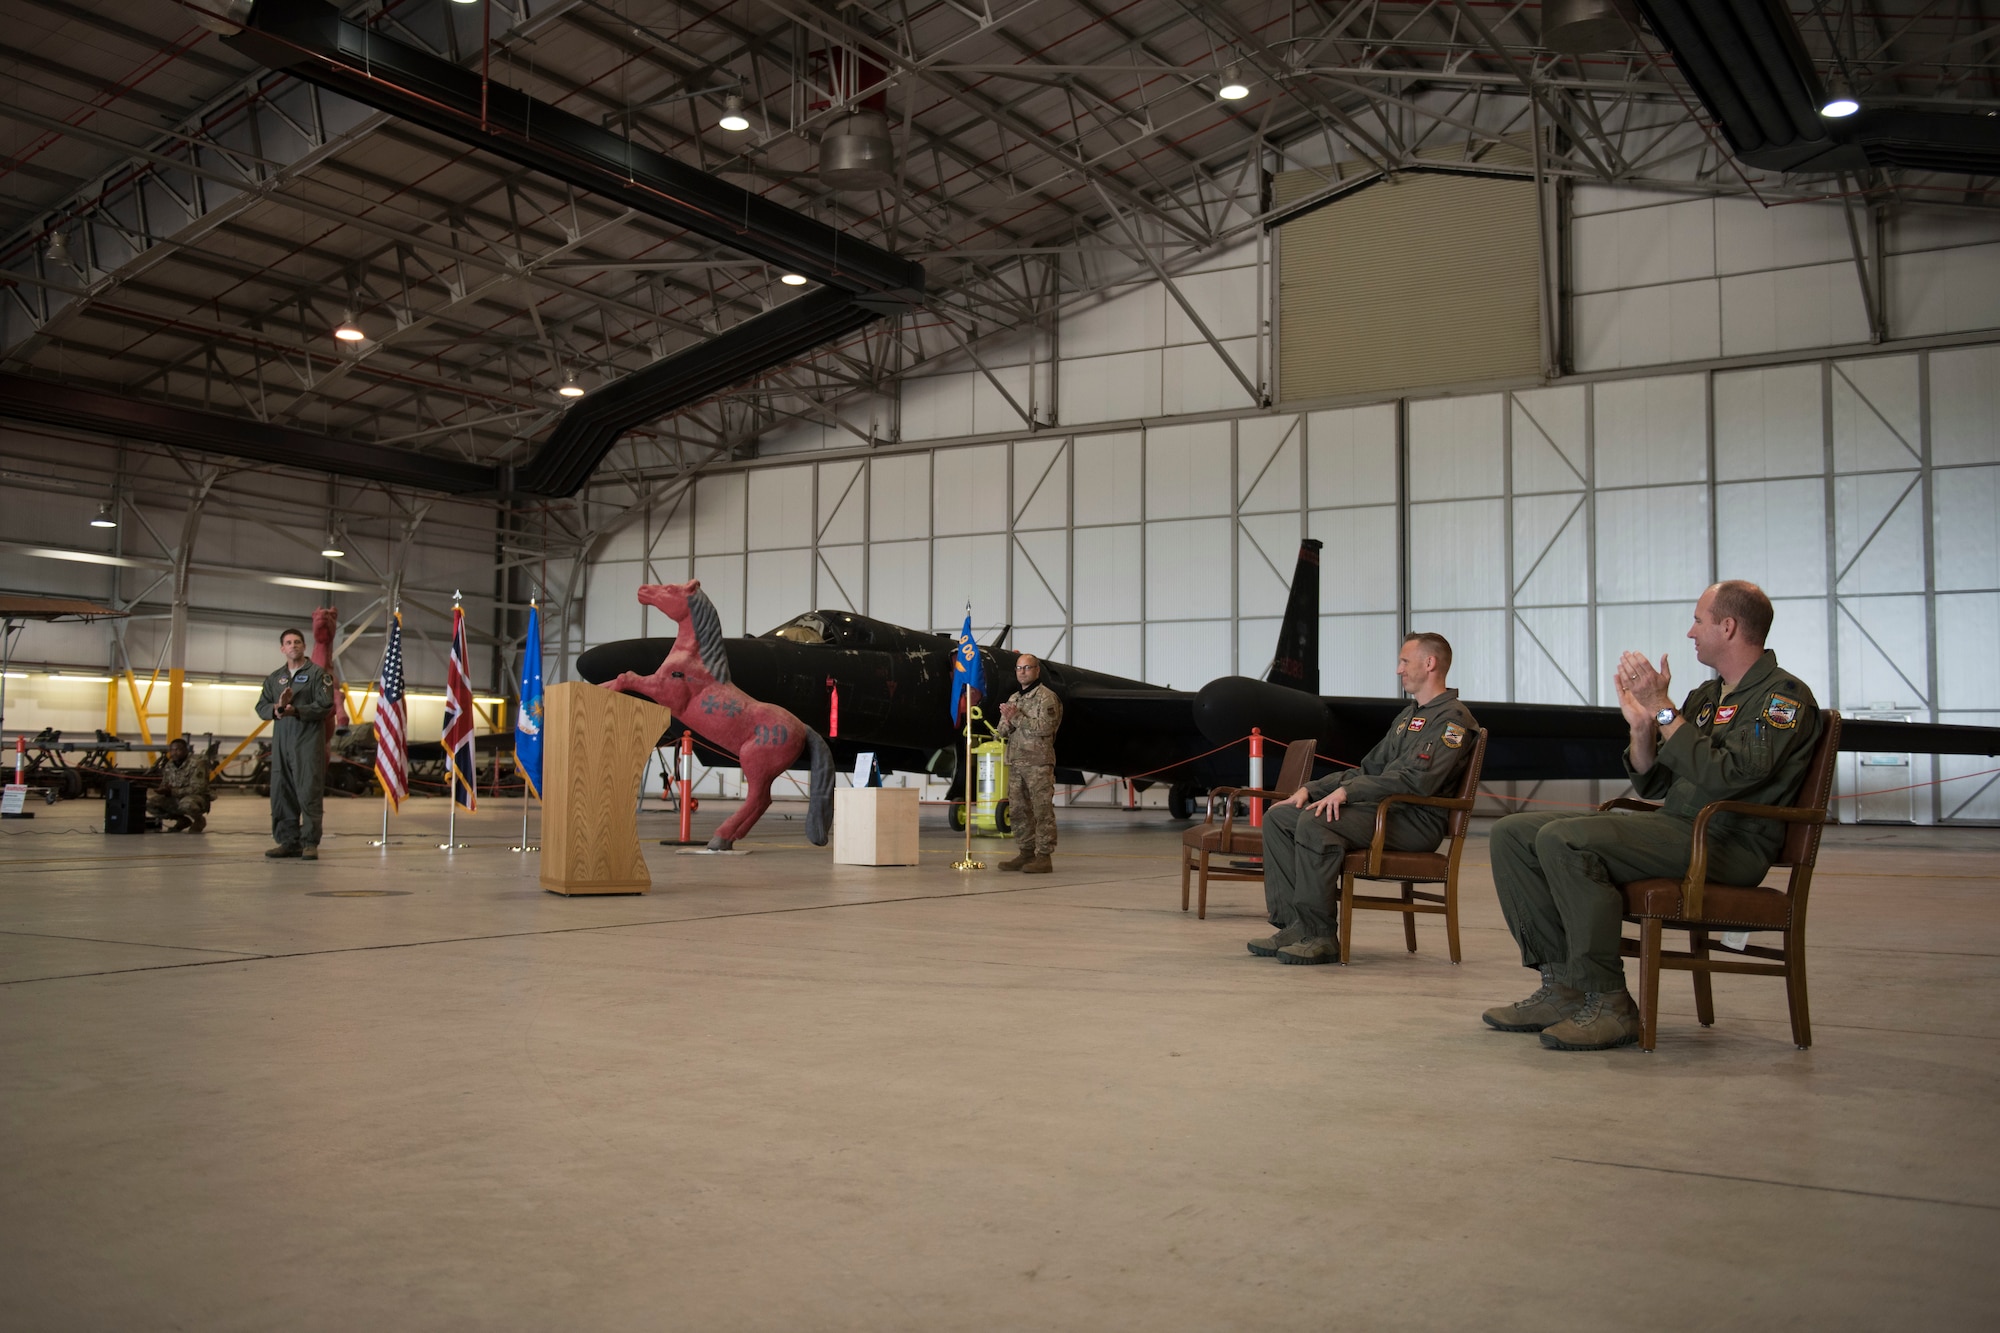 U.S. Air Force Lt. Col. Peter Gryn, outgoing 99th Expeditionary Reconnaissance Squadron commander, receives applause for receiving The Meritorious Service Medal award during a change of command ceremony, at RAF Fairford, England, June 24, 2020. The change of command ceremony is a military tradition that represents a formal transfer of a unit’s authority and responsibility from one commander to another. (U.S. Air Force photo by Airman 1st Class Jennifer Zima)